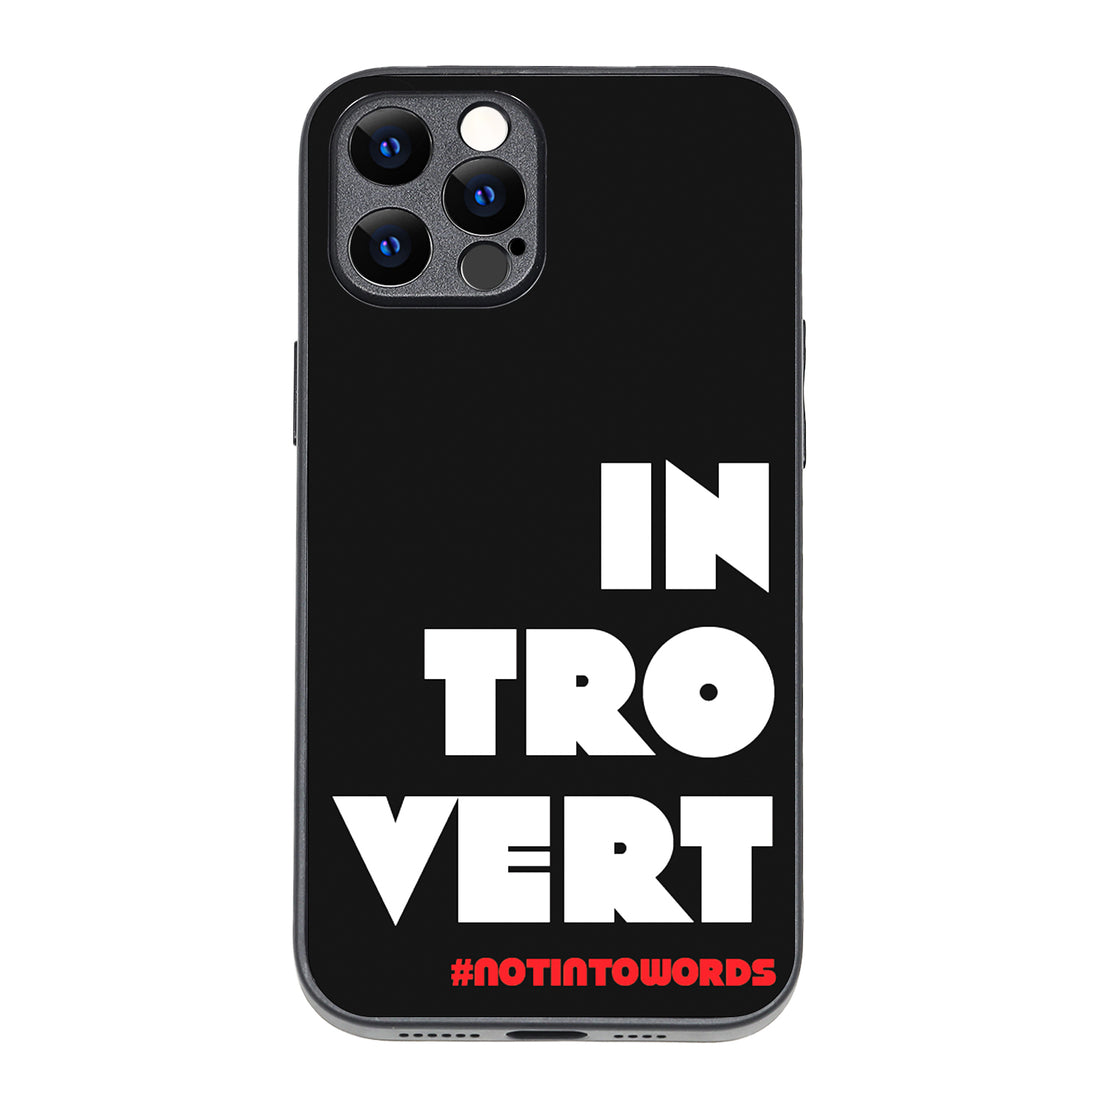 Introvert Motivational Quotes iPhone 12 Pro Max Case